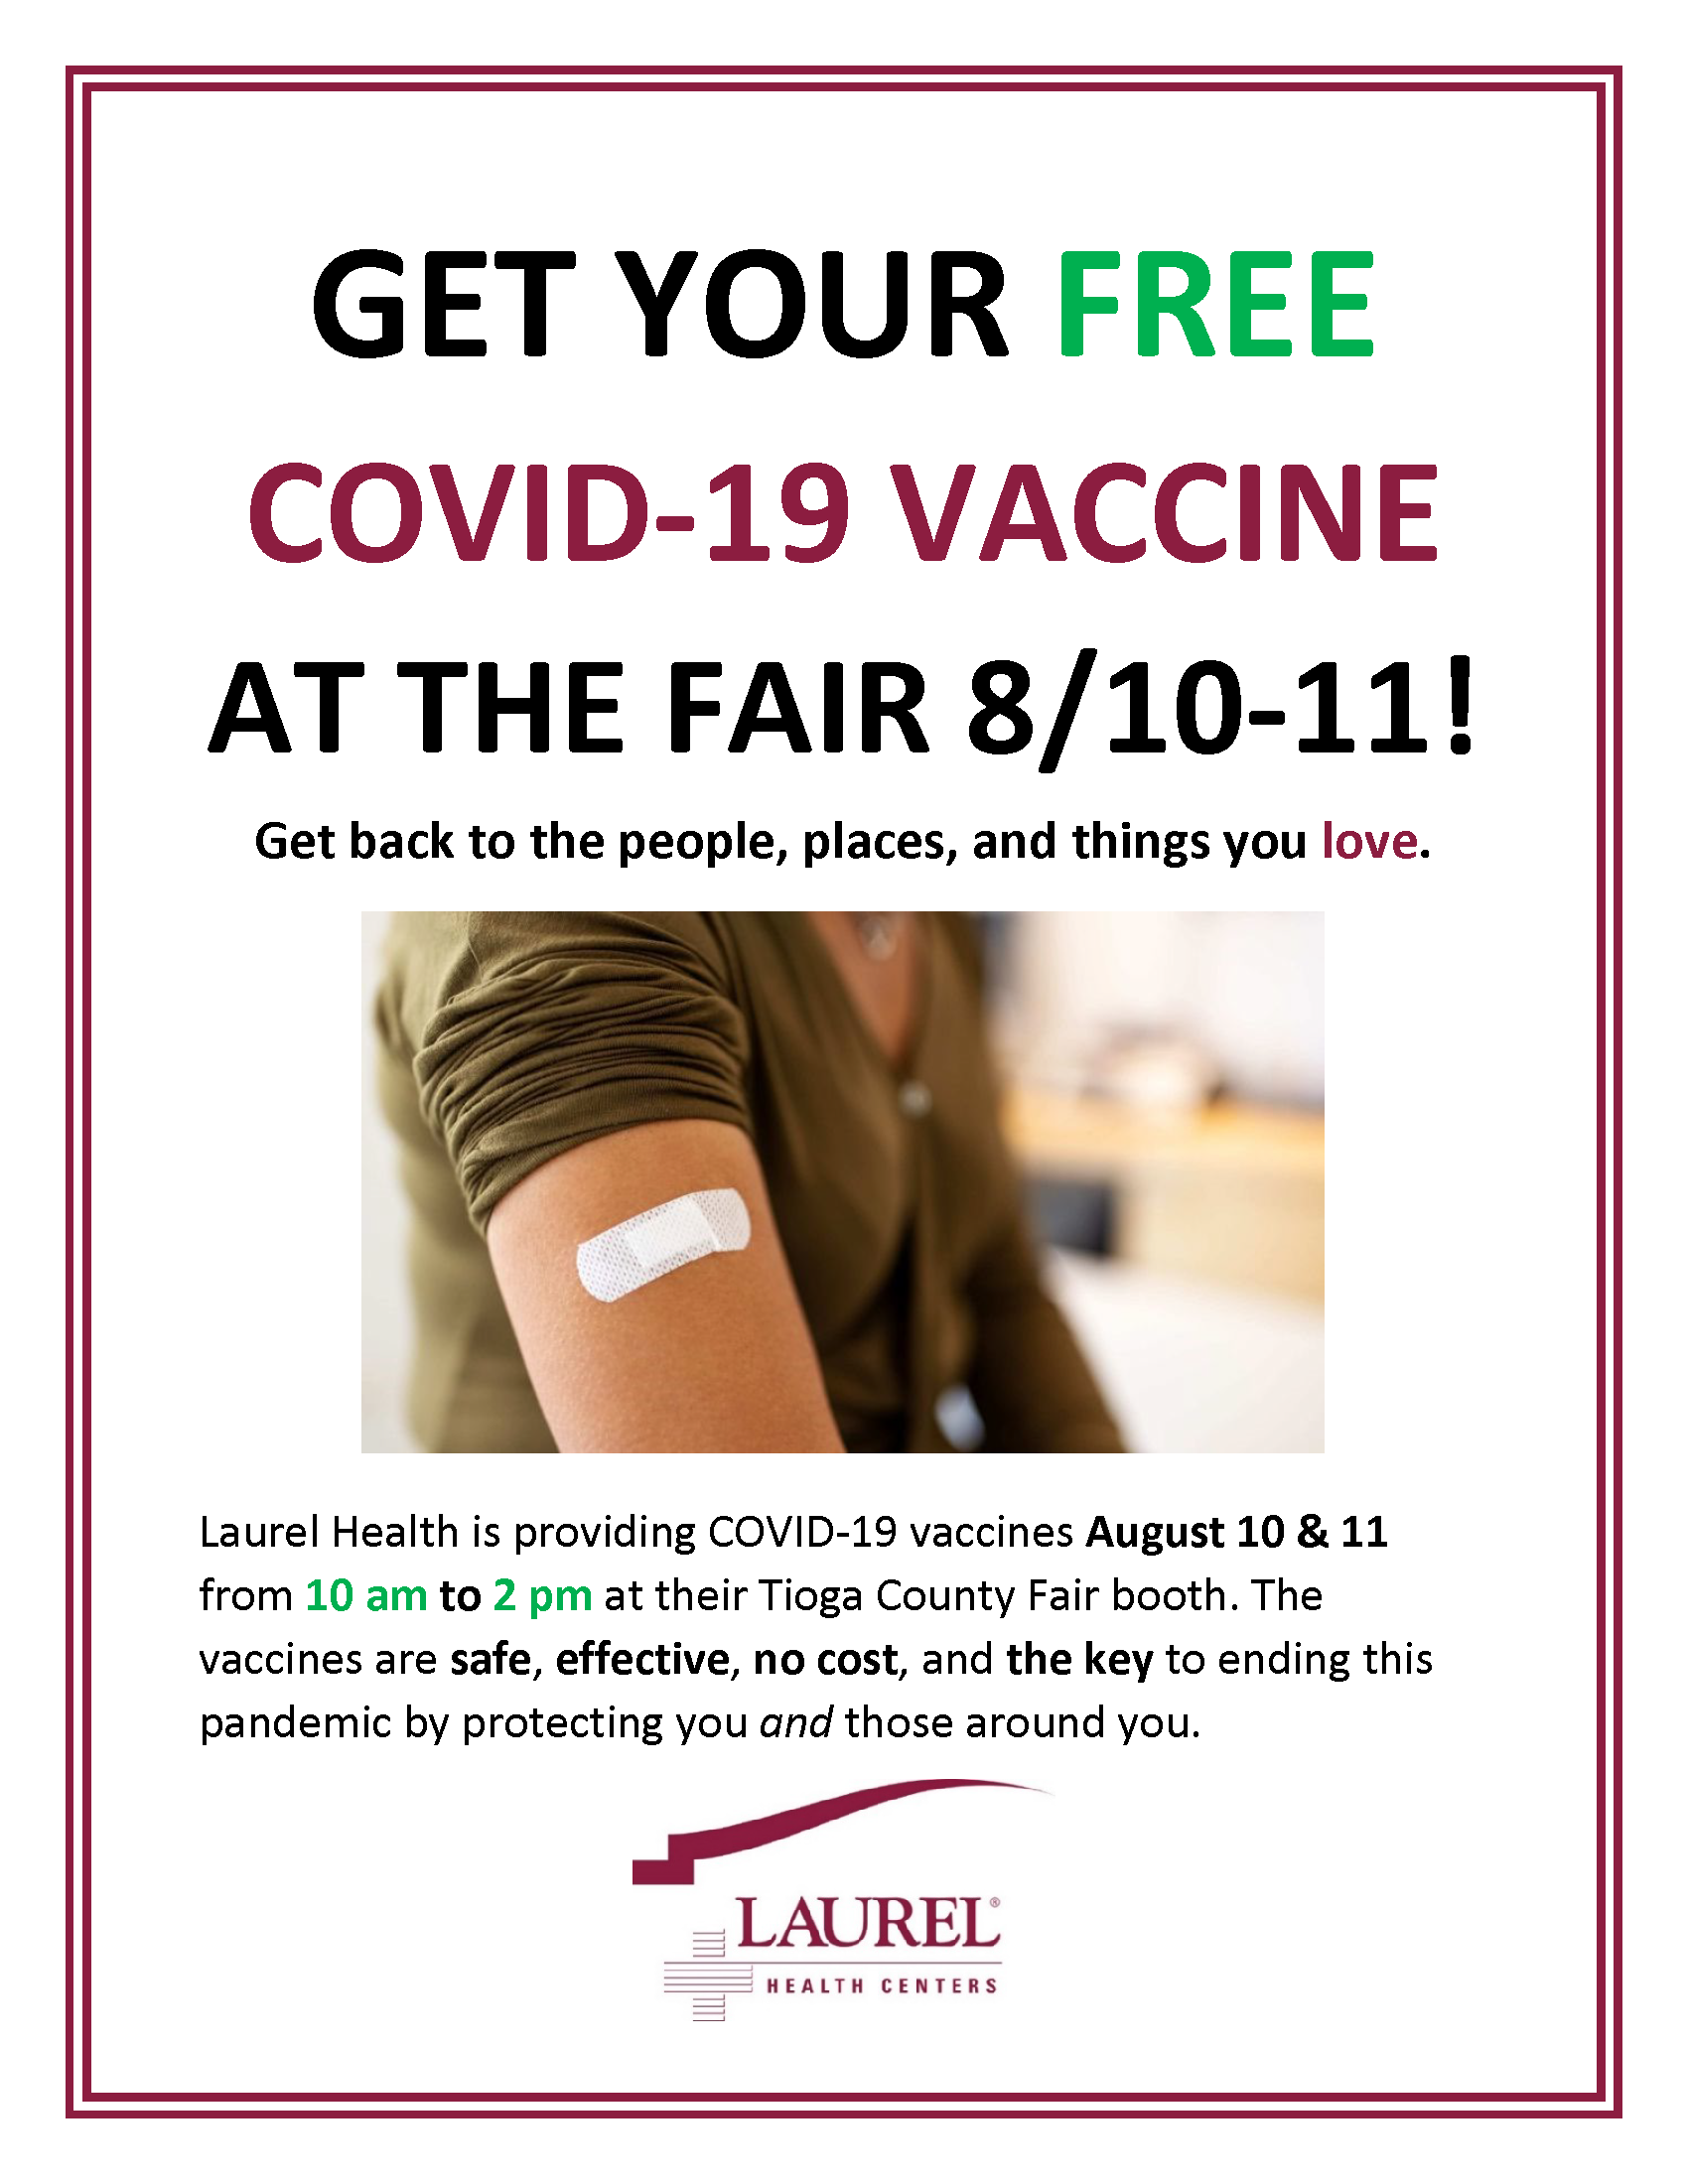 Get your free COVID-19 vaccine from Laurel Health at Tioga County Fair on Aug 10th or 11th